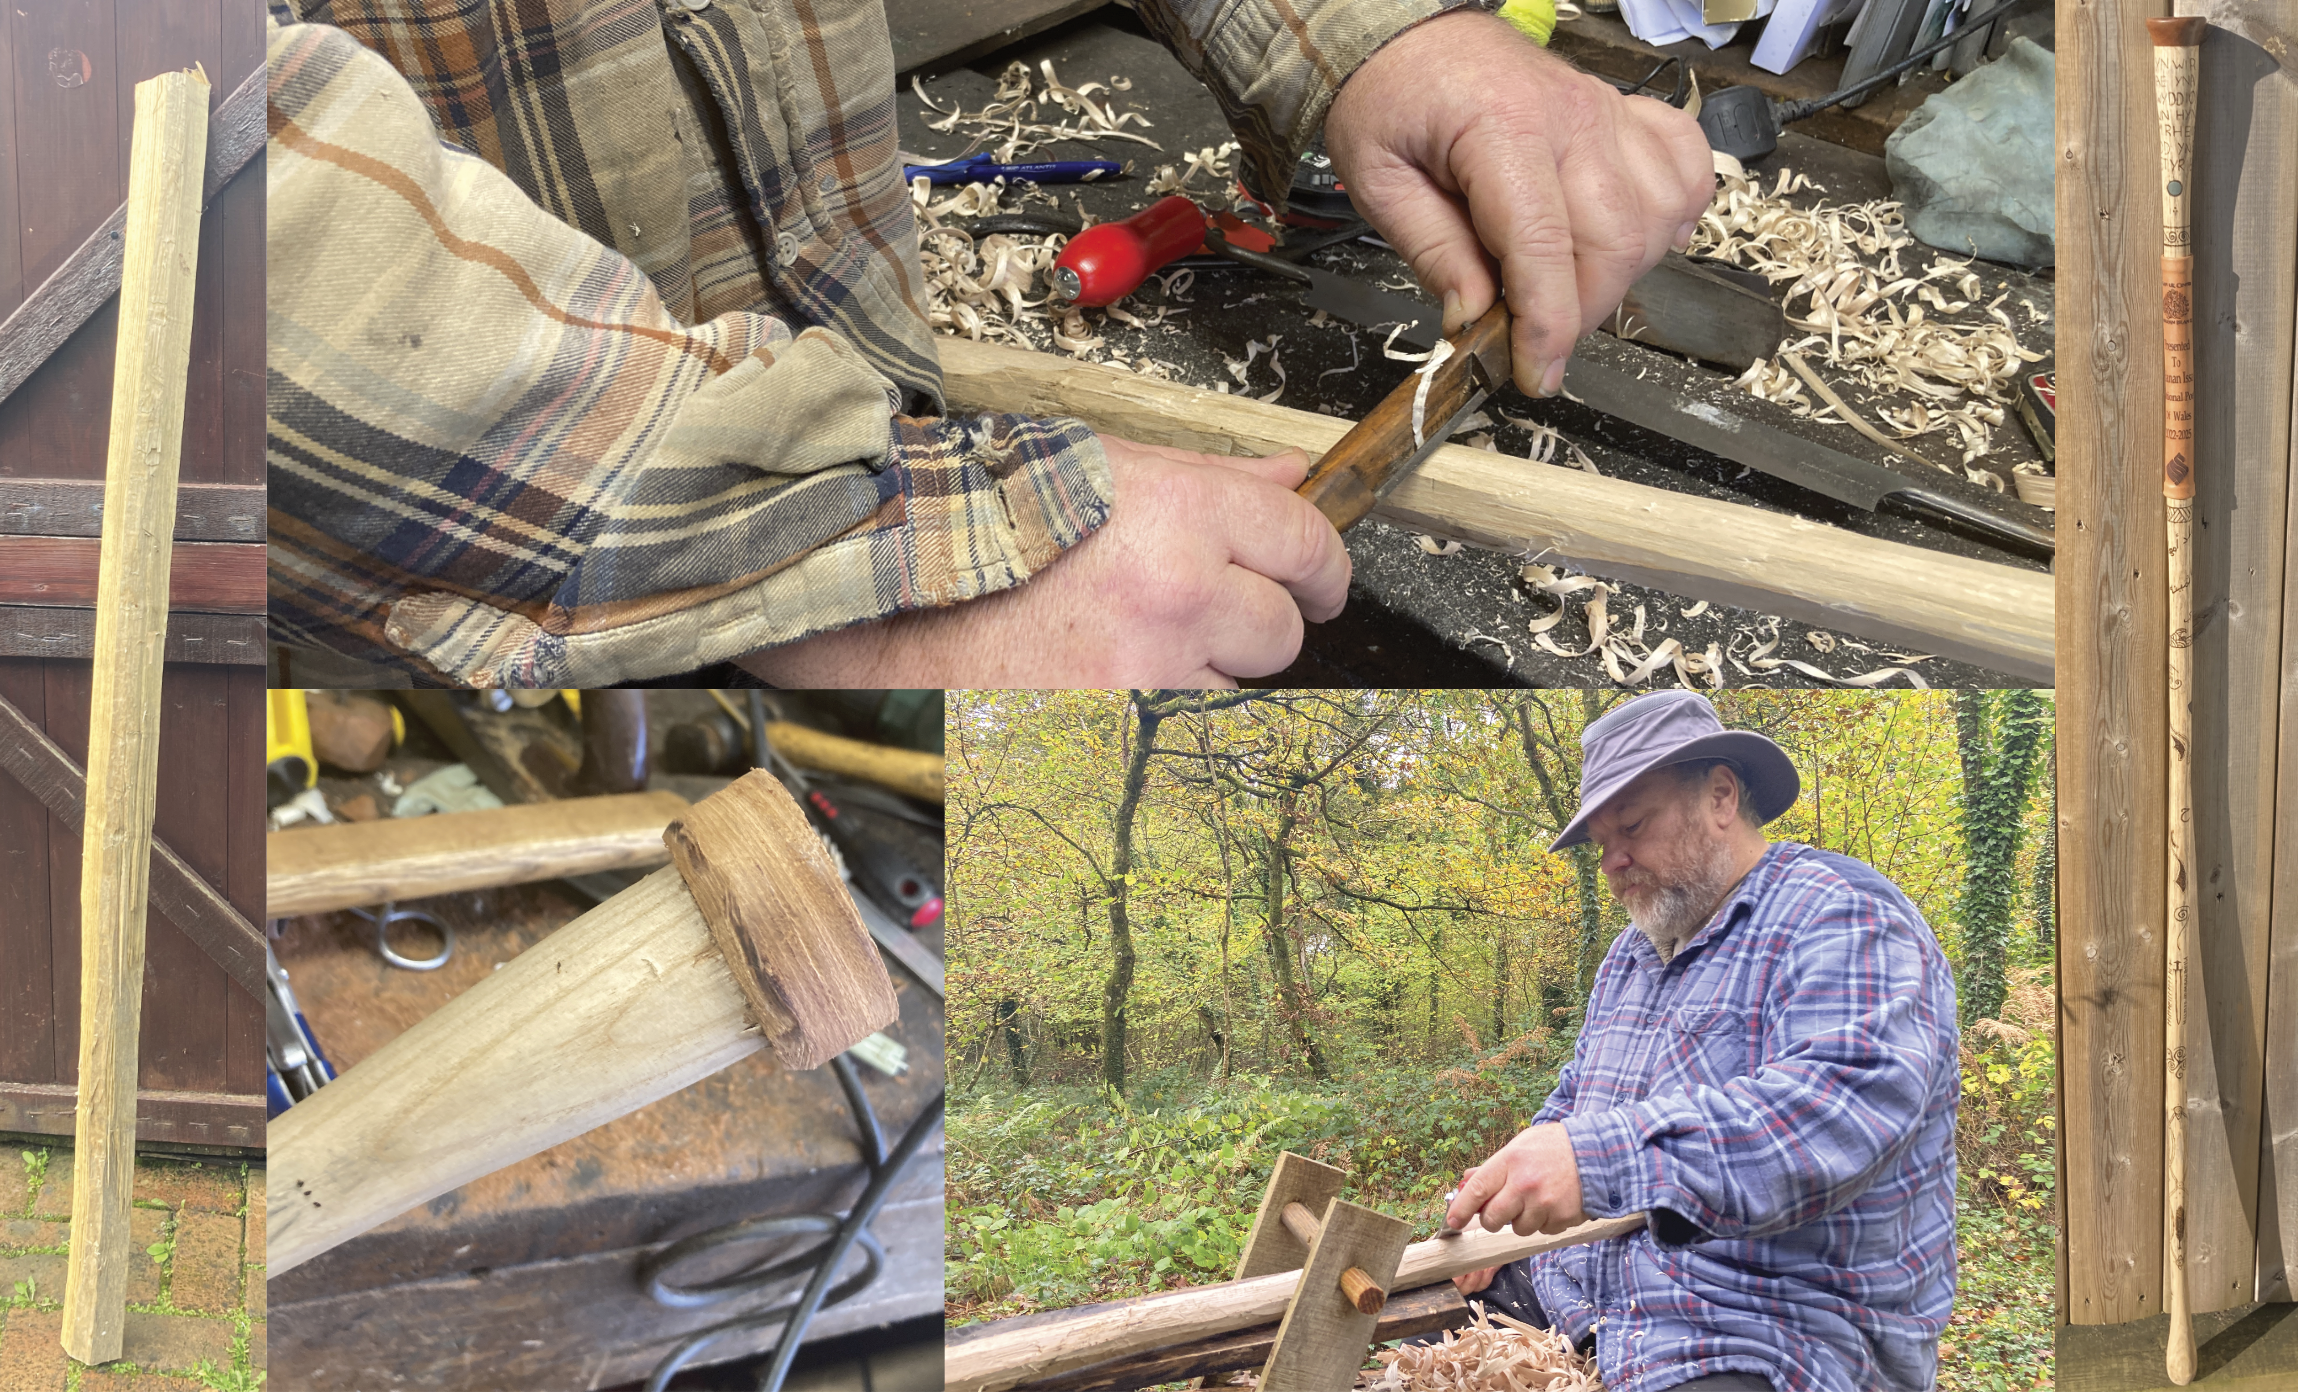 Composite of images of creating the staff. On left, the raw wood pole. At top, the pole being shaved by a knife: it sits on a work surface with some wood shavings, and the carver (in brown checked shirt, only chest, arms and hands visible) draws a knife along the pole. Bottom left is a closeup of the staff with the leather attached, and bottom right is the carver outside with leafy trees in the background. He is seated with the pole before him supported on a wooden structure as he shaves flakes of wood from the pole; a pile of wood shavings is between him and the pole. He is bearded with a full-brimmed hat and wears a blue checked shirt. Along the right edge is a long image of the finished staff with leather and pyrographic markings.